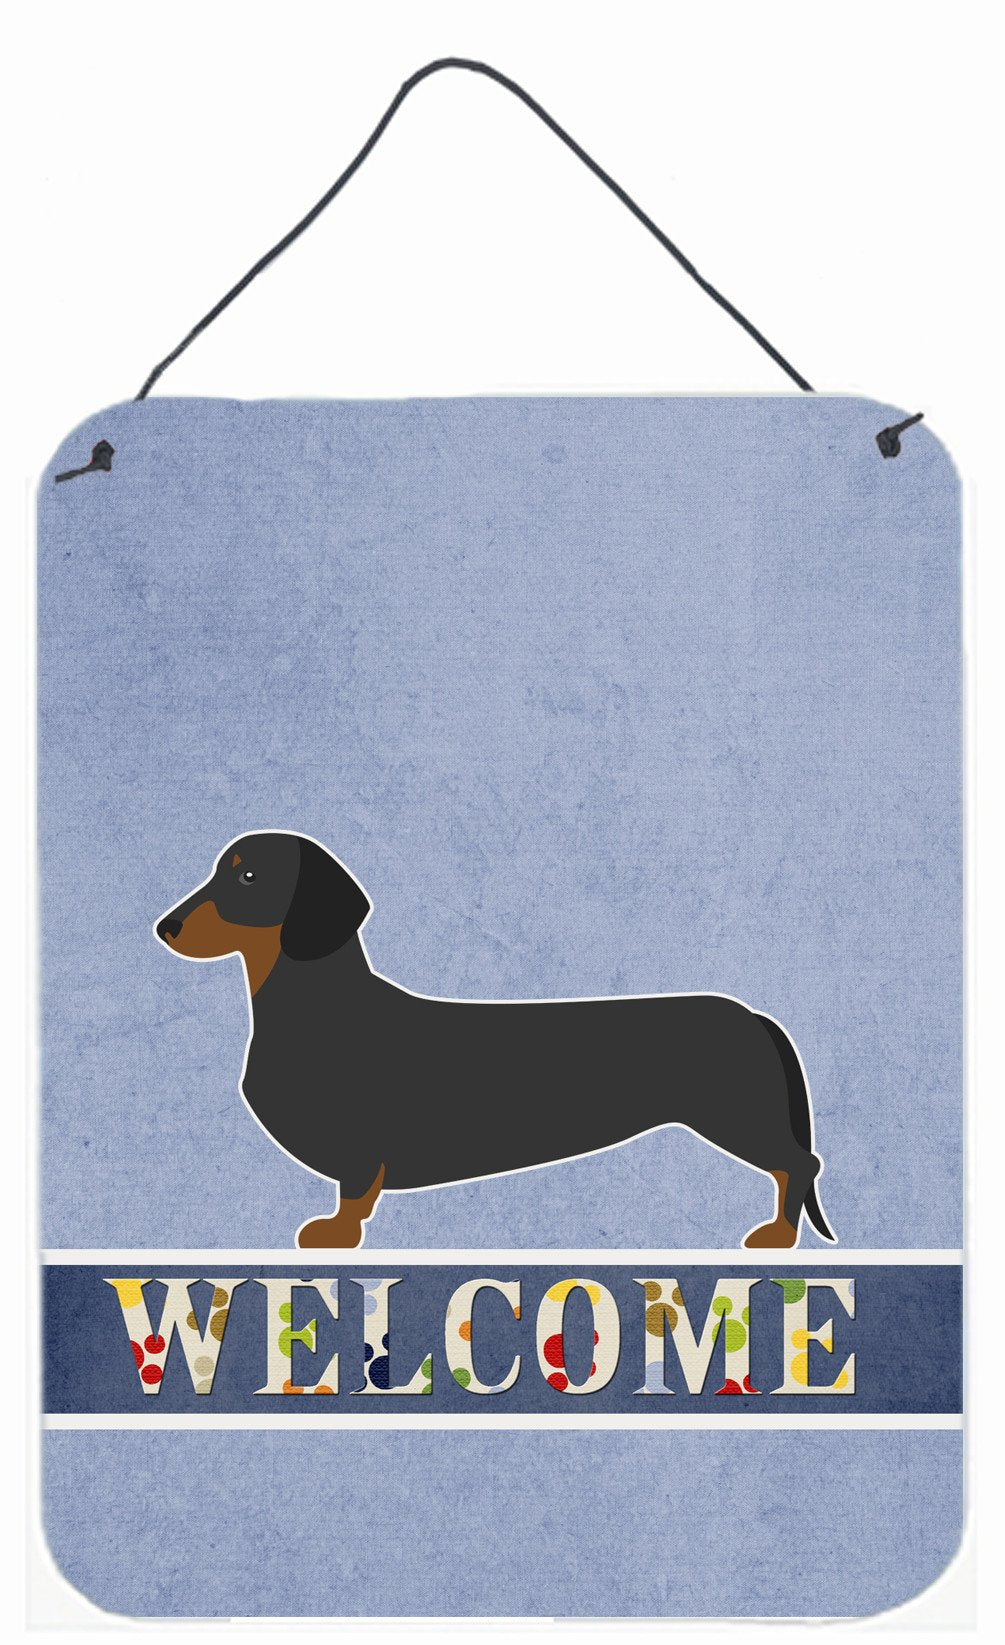 Dachshund Welcome Wall or Door Hanging Prints BB5486DS1216 by Caroline's Treasures